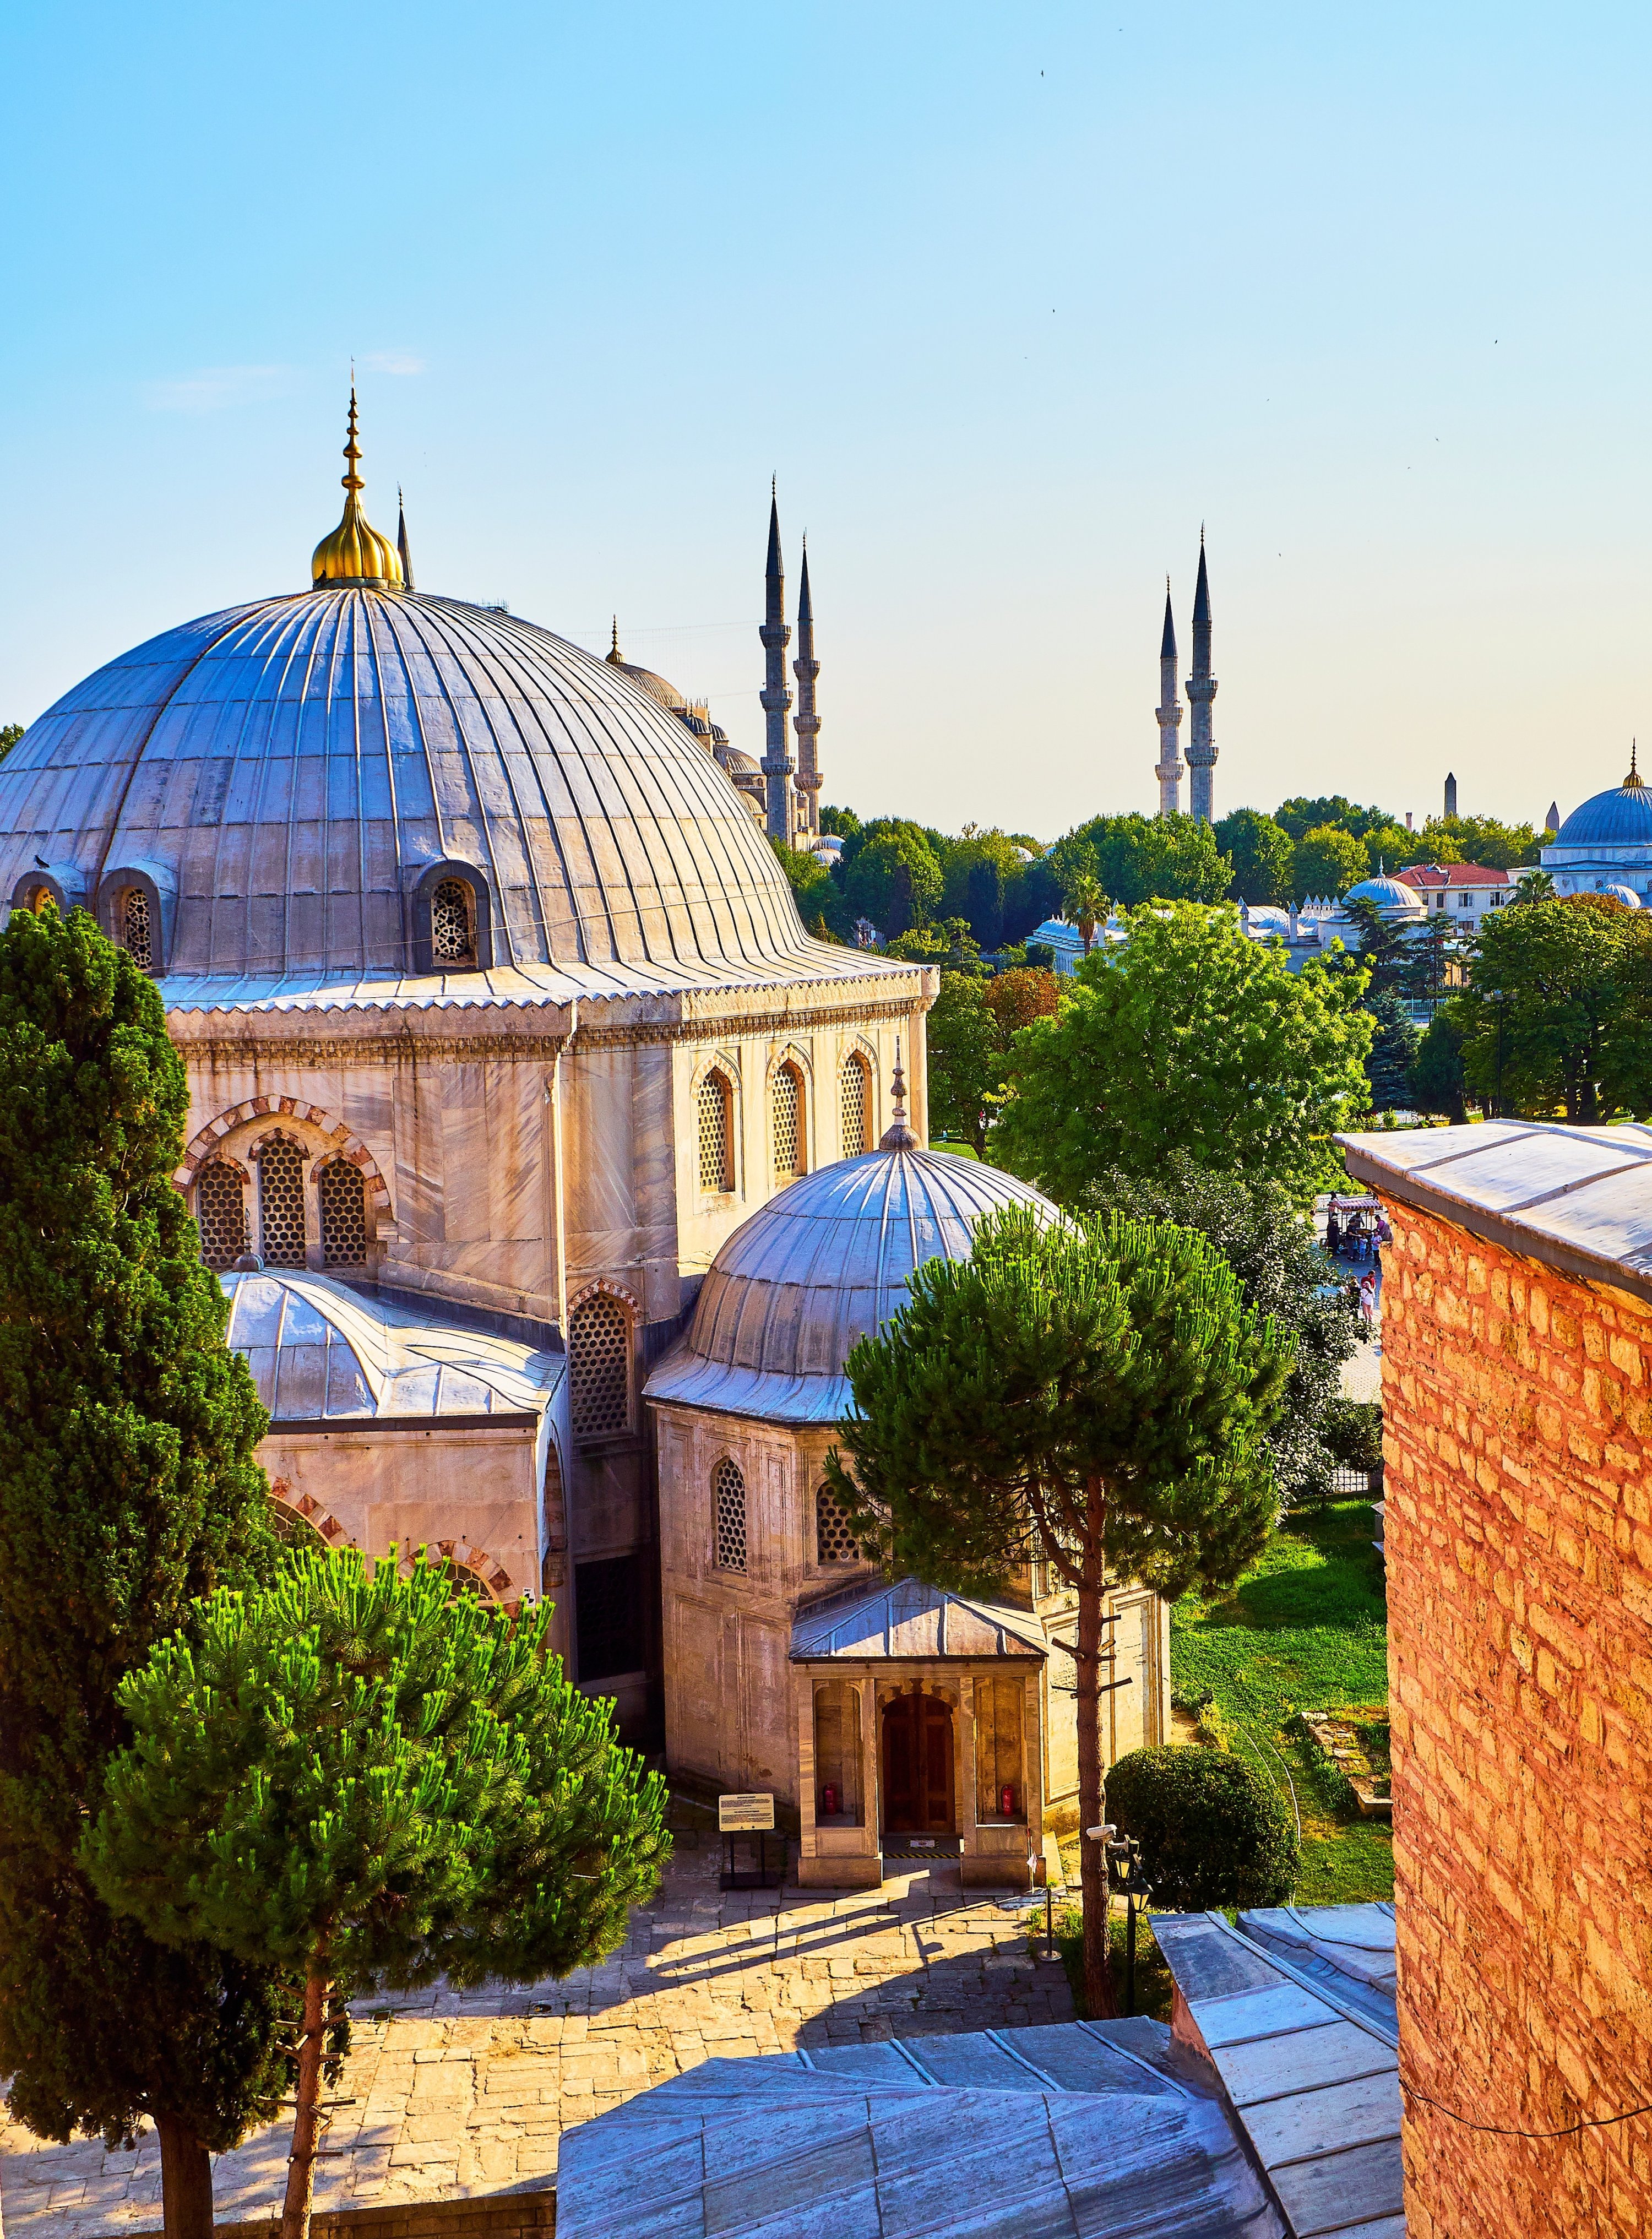 Tomb of Sultan Murad III at the south side of the Hagia Sophia Mosque, Istanbul, Turkey, July 10, 2018. (Shutterstock)